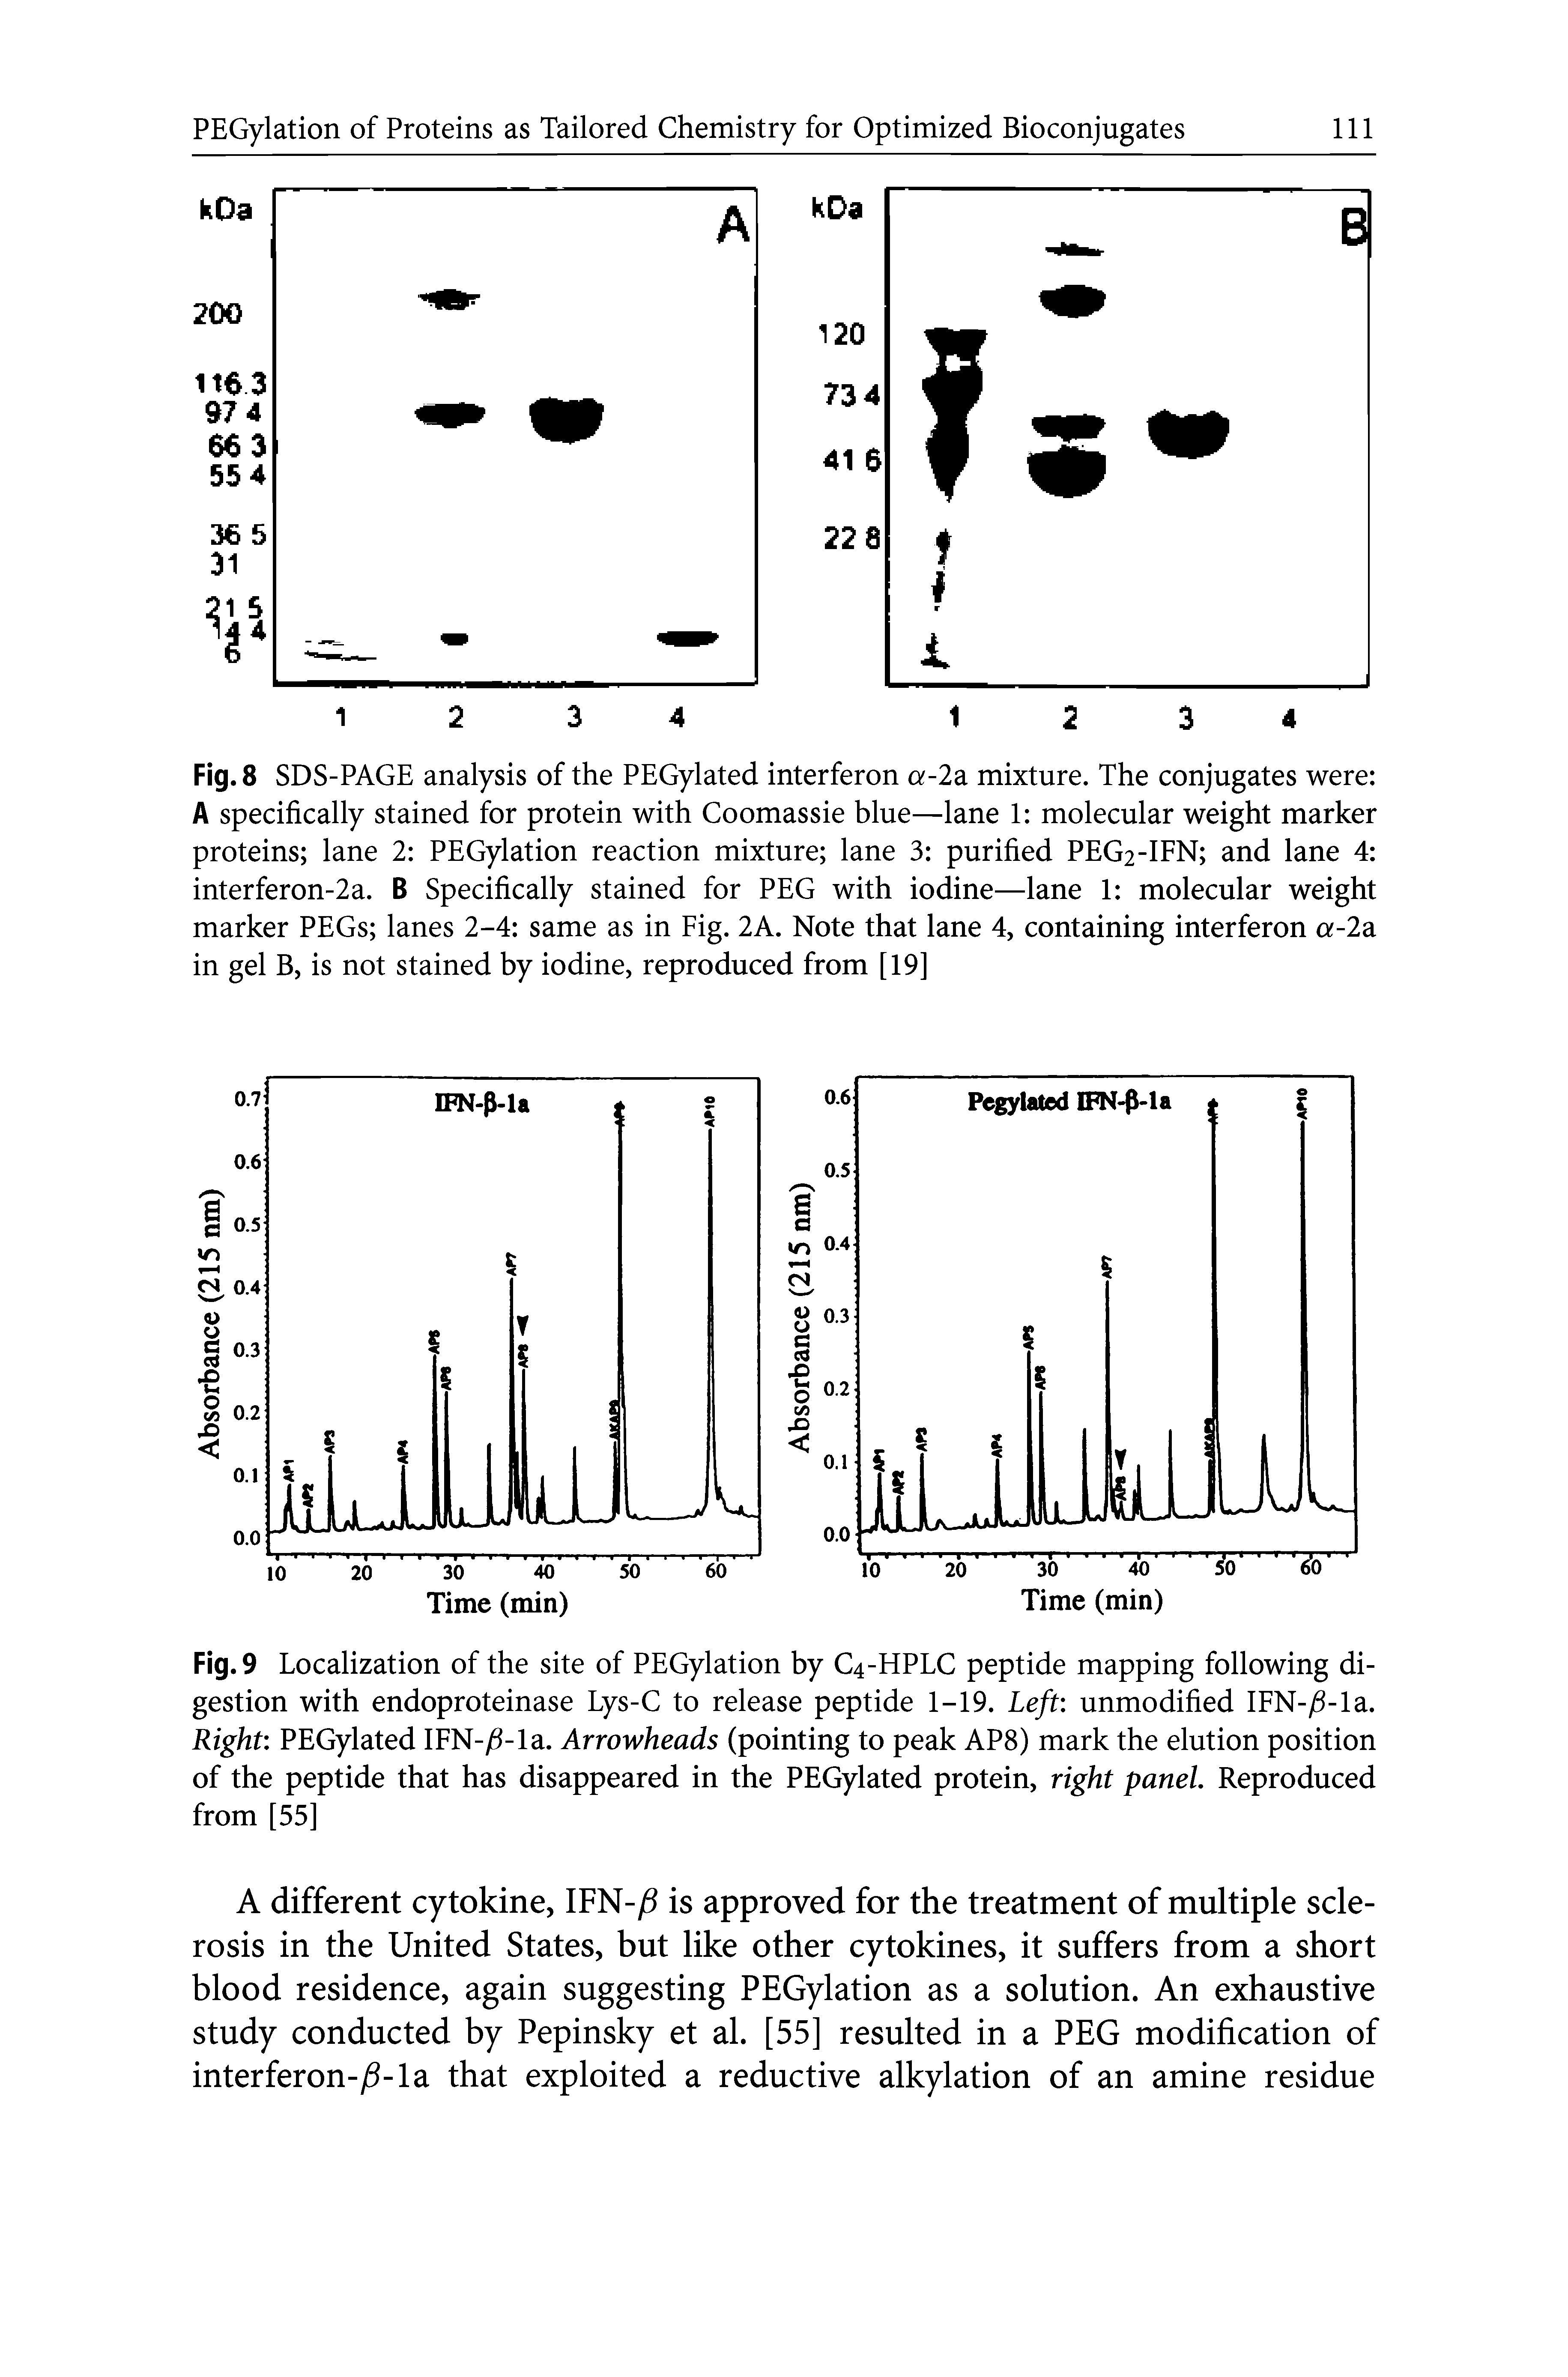 Fig. 8 SDS-PAGE analysis of the PEGylated interferon Qf-2a mixture. The conjugates were A specifically stained for protein with Coomassie blue—lane 1 molecular weight marker proteins lane 2 PEGylation reaction mixture lane 3 purified PEG2-IFN and lane 4 interferon-2 a. B Specifically stained for PEG with iodine—lane 1 molecular weight marker PEGs lanes 2-4 same as in Fig. 2A. Note that lane 4, containing interferon a-2a in gel B, is not stained by iodine, reproduced from [19]...